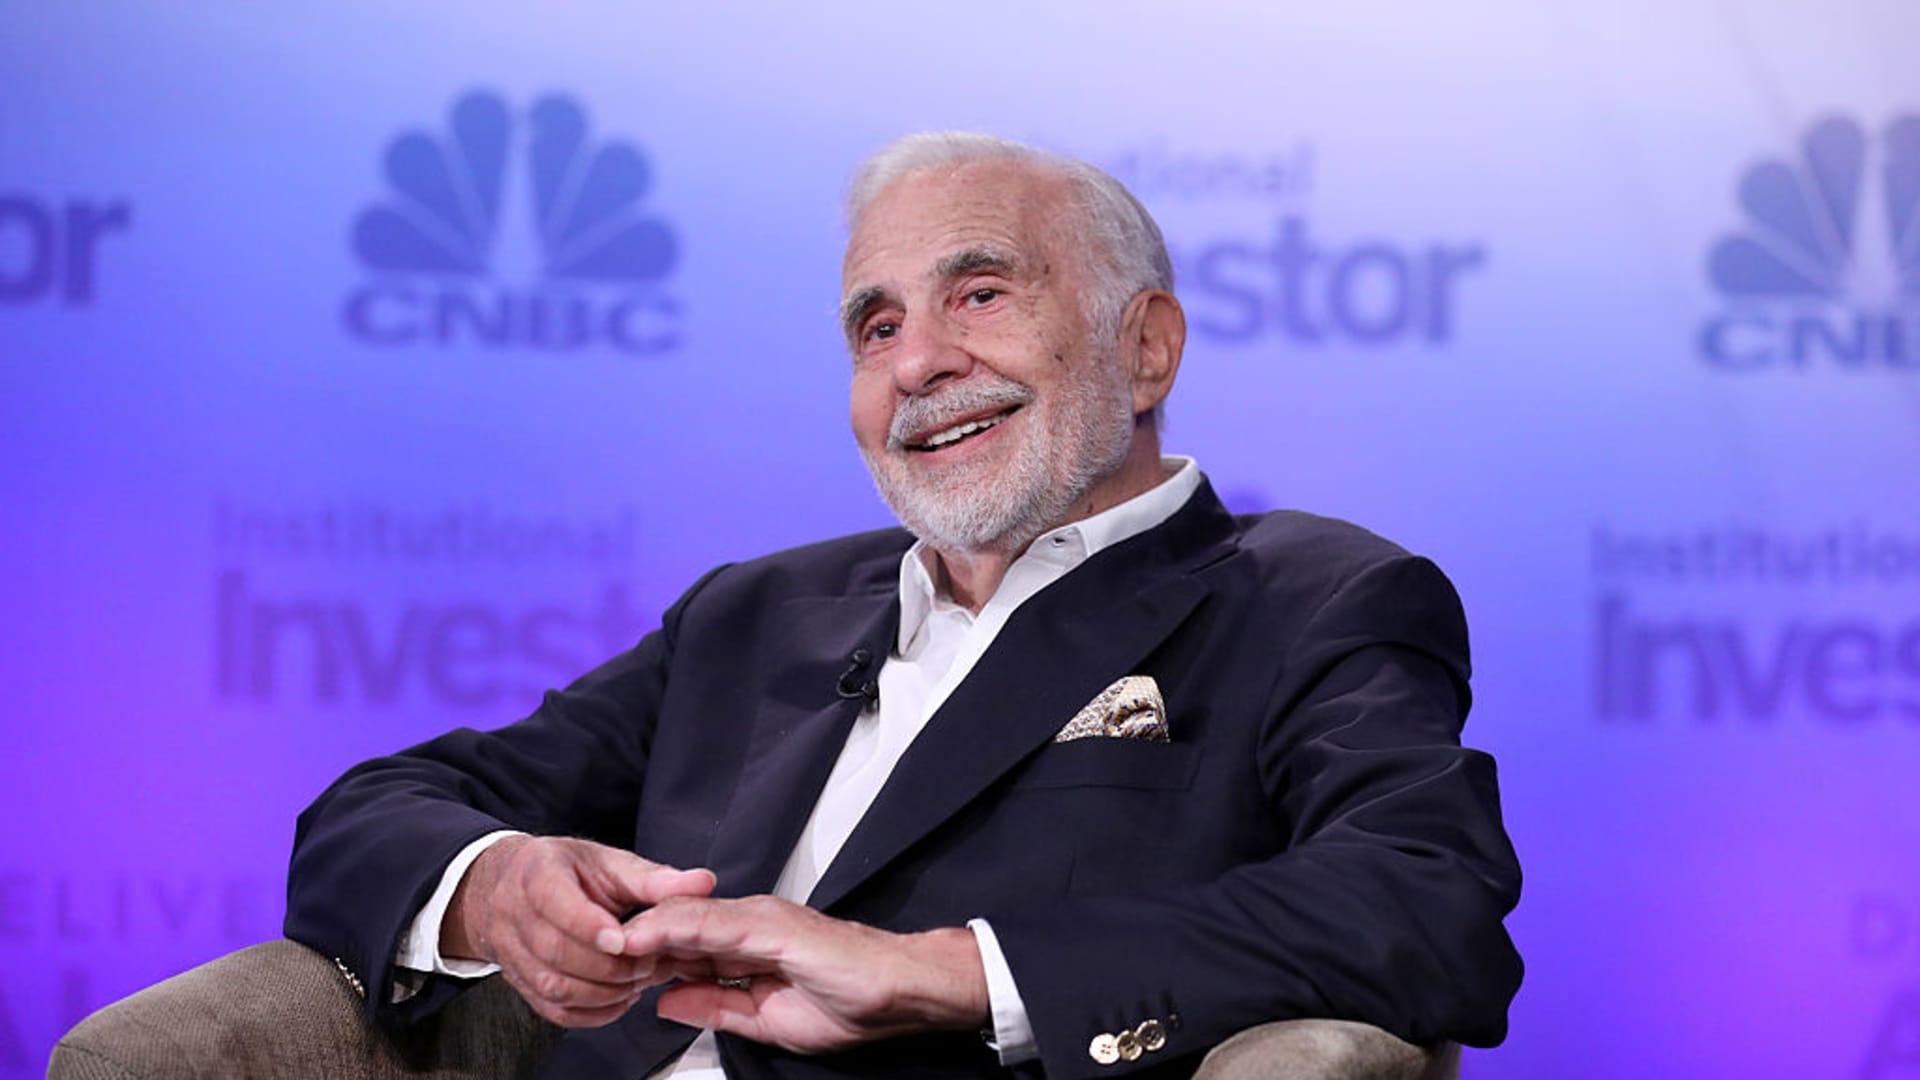 Carl Icahn says he nonetheless thinks we’re in a bear market regardless of Thursday’s rally